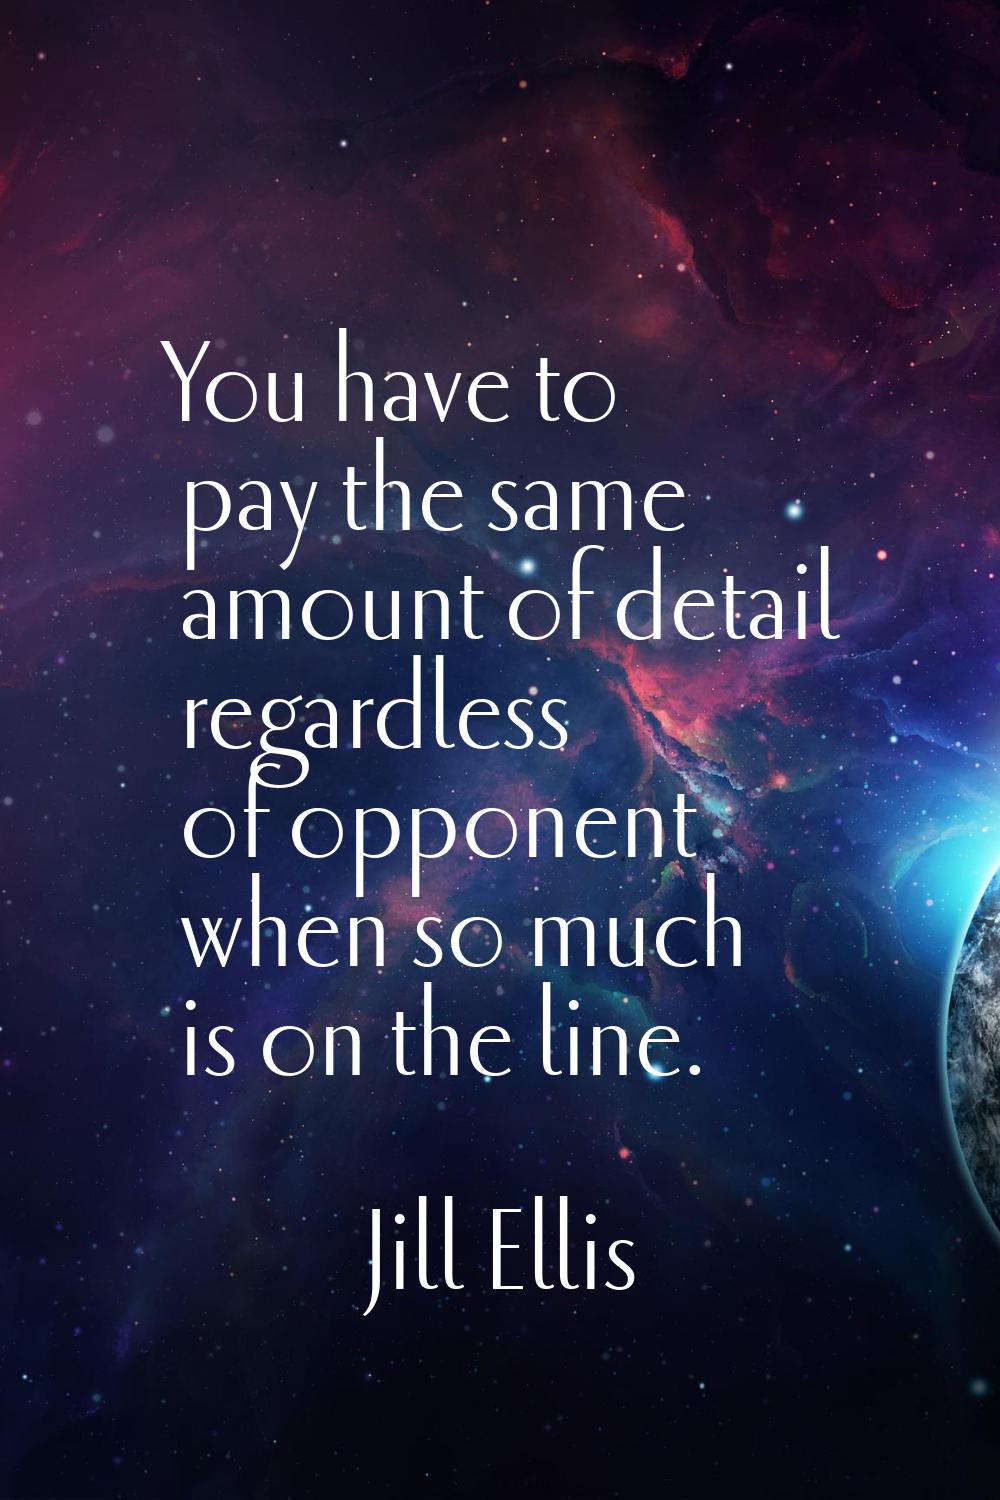 You have to pay the same amount of detail regardless of opponent when so much is on the line.